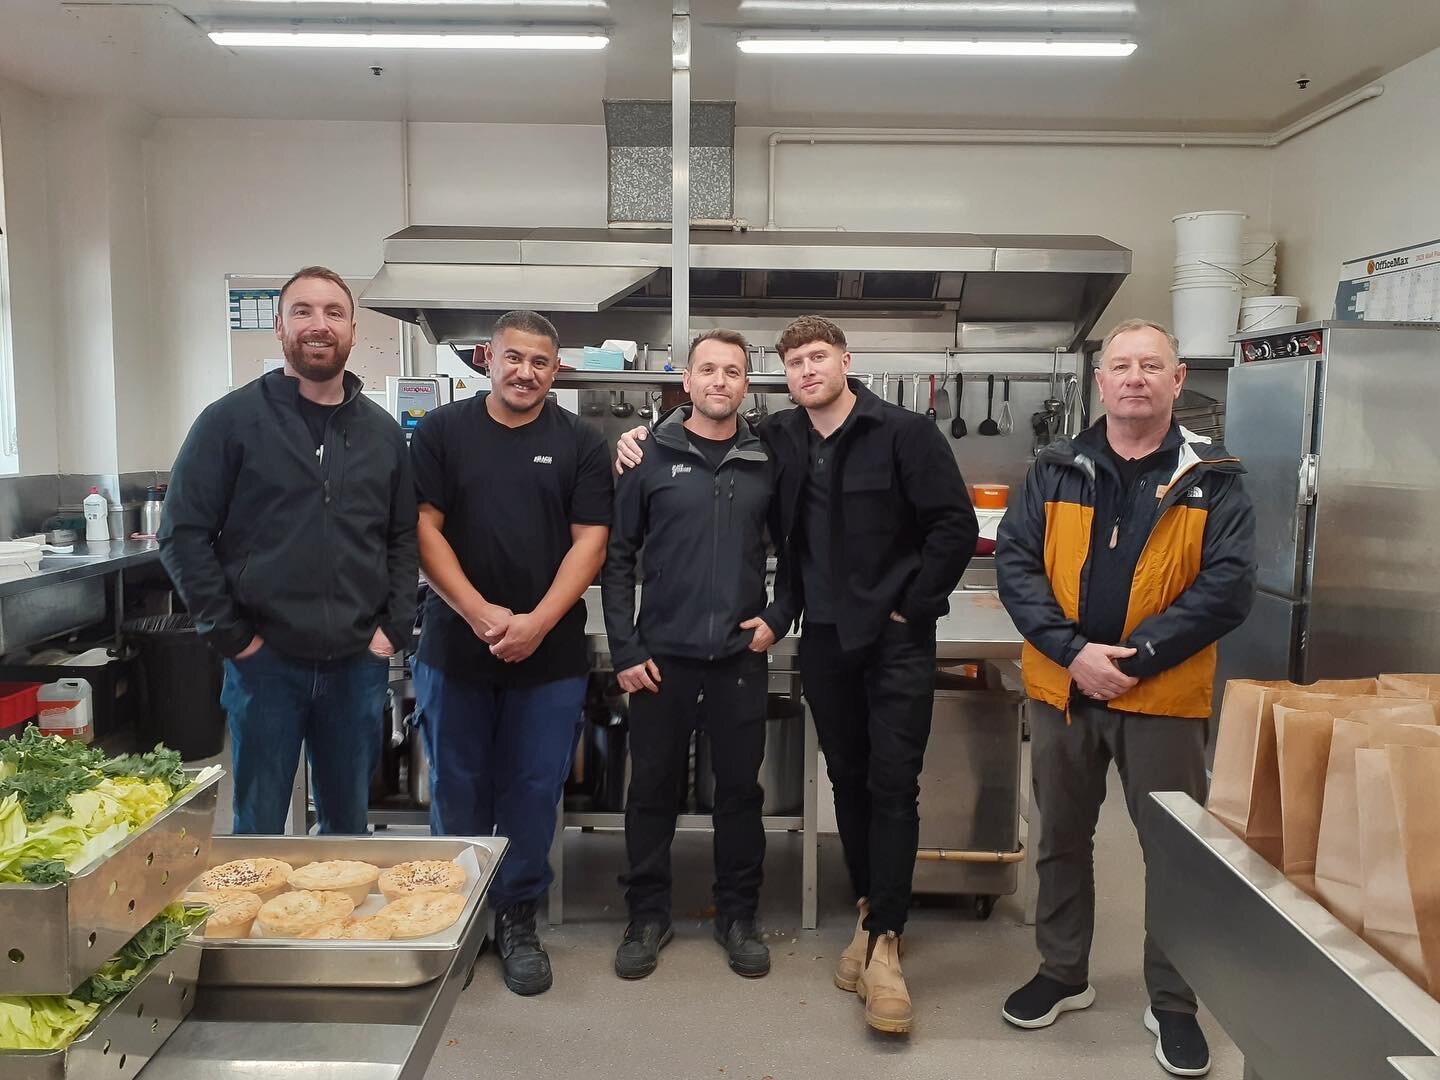 Our Wellington team had a wonderful experience volunteering at @compassionsoupkitchen assisting with dinner preparation. 

The team at Compassion Soup Kitchen are doing incredible work in supporting the local community. We look forward to returning s